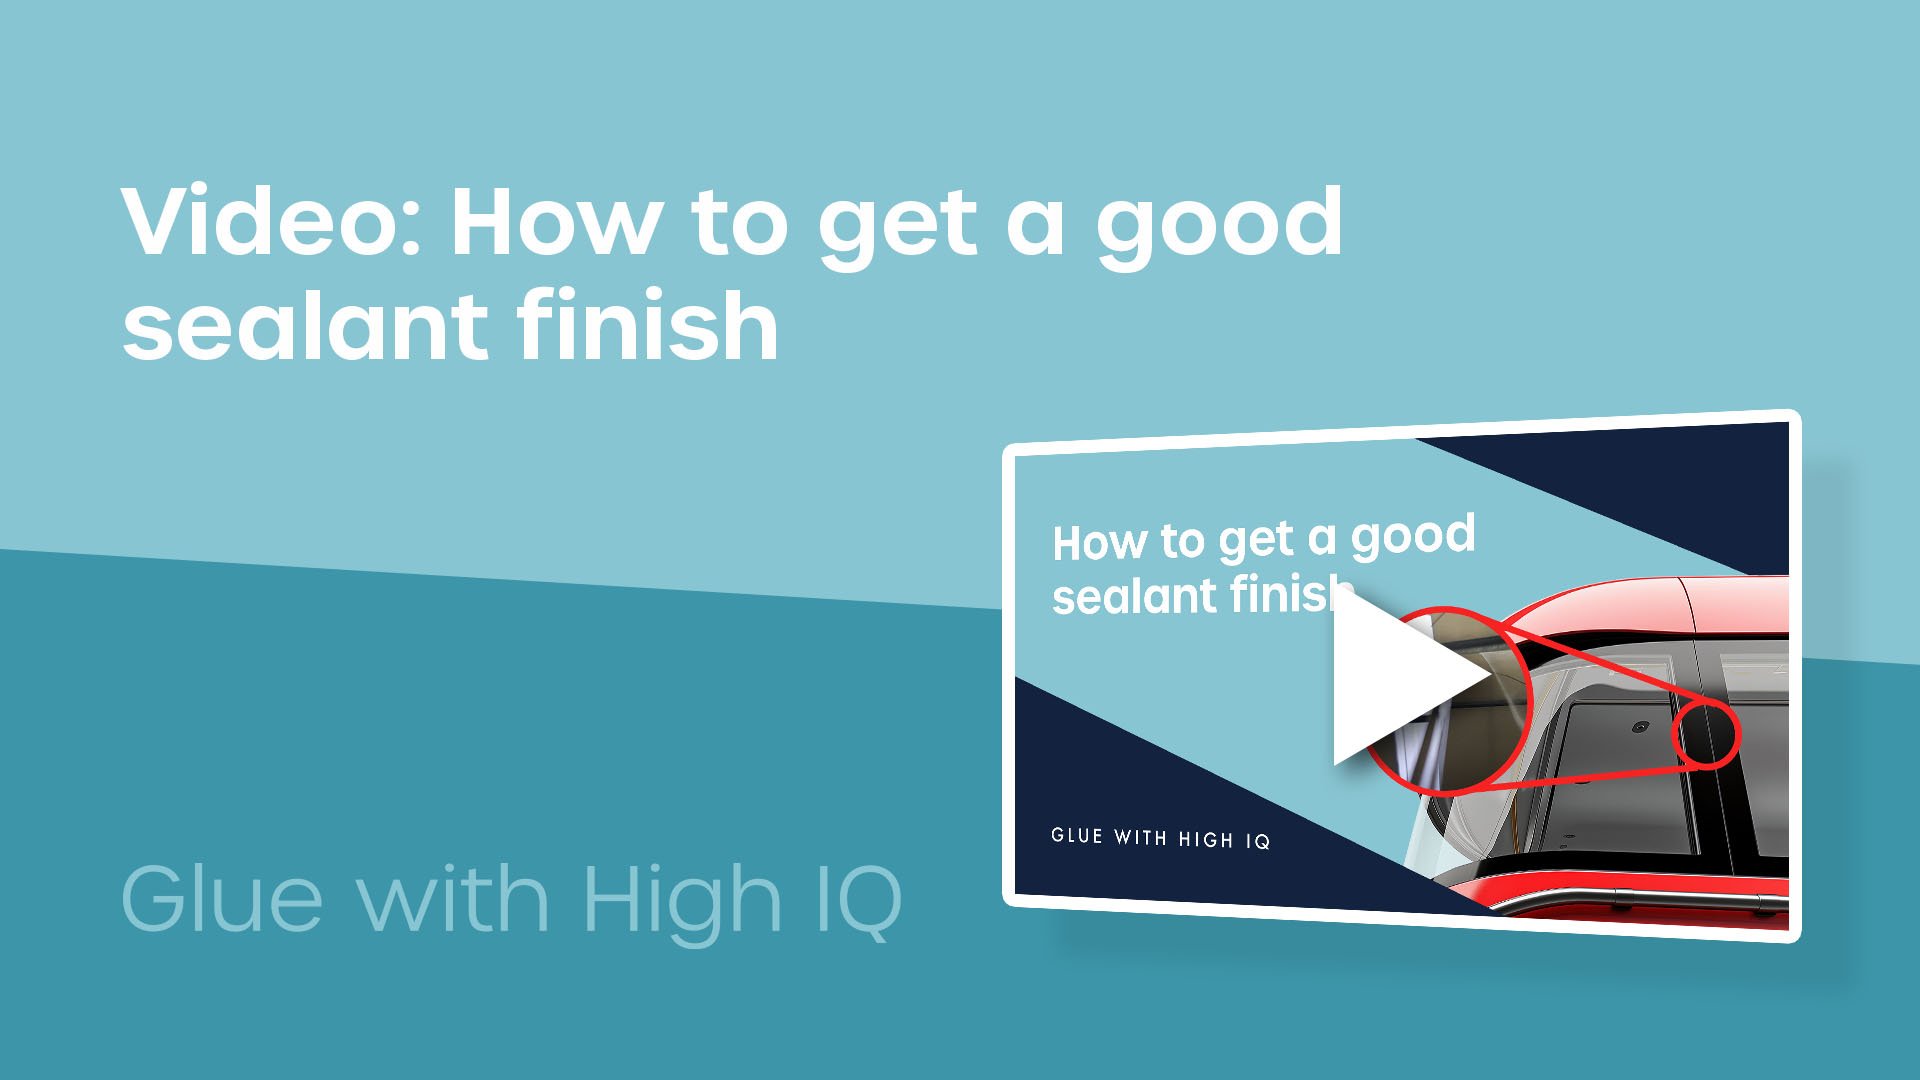 How to get a good sealant finish